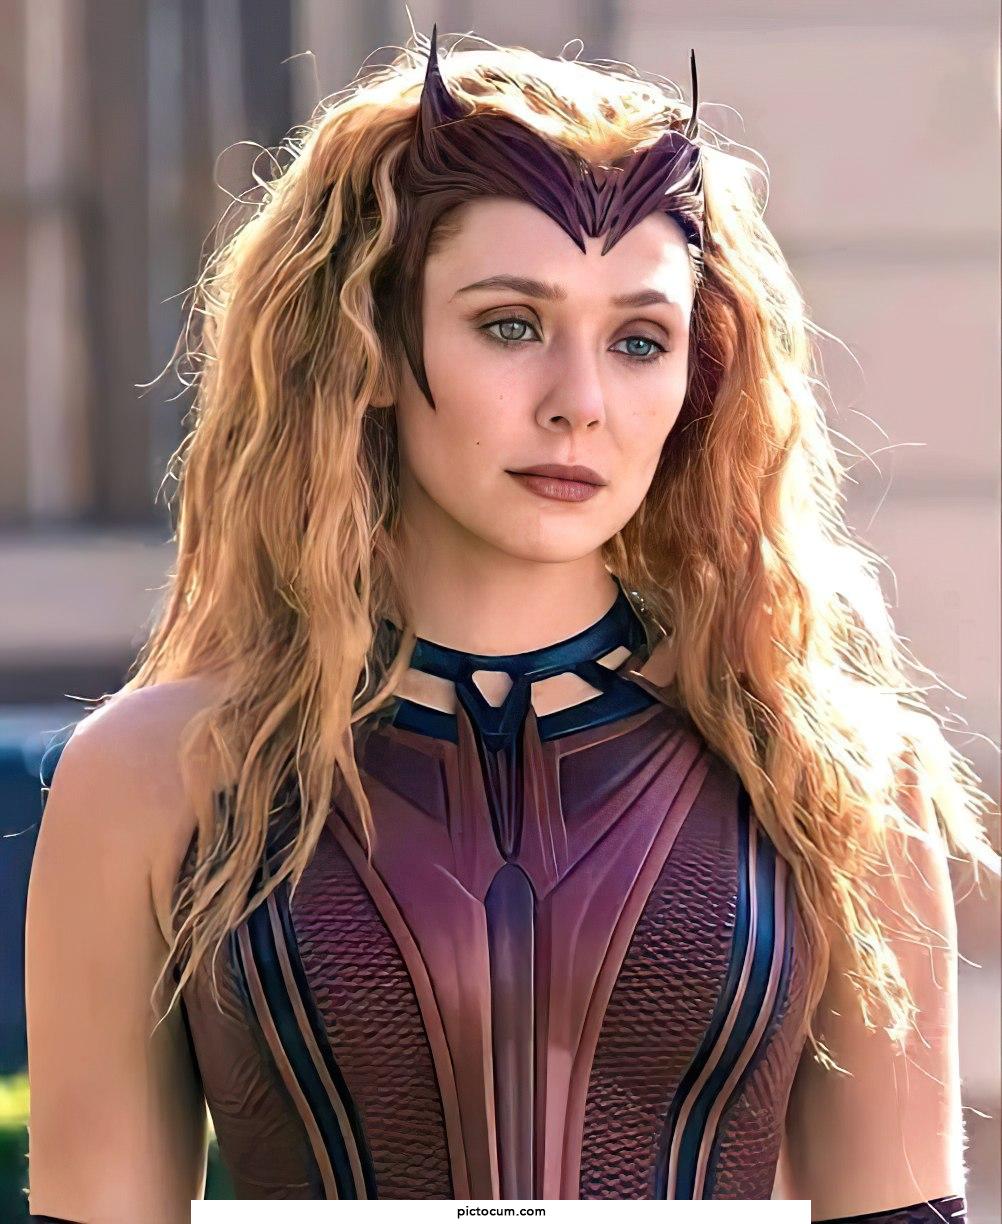 I bet Elizabeth Olsen gives really good blowjobs. Wish she'd show her breasts more often.